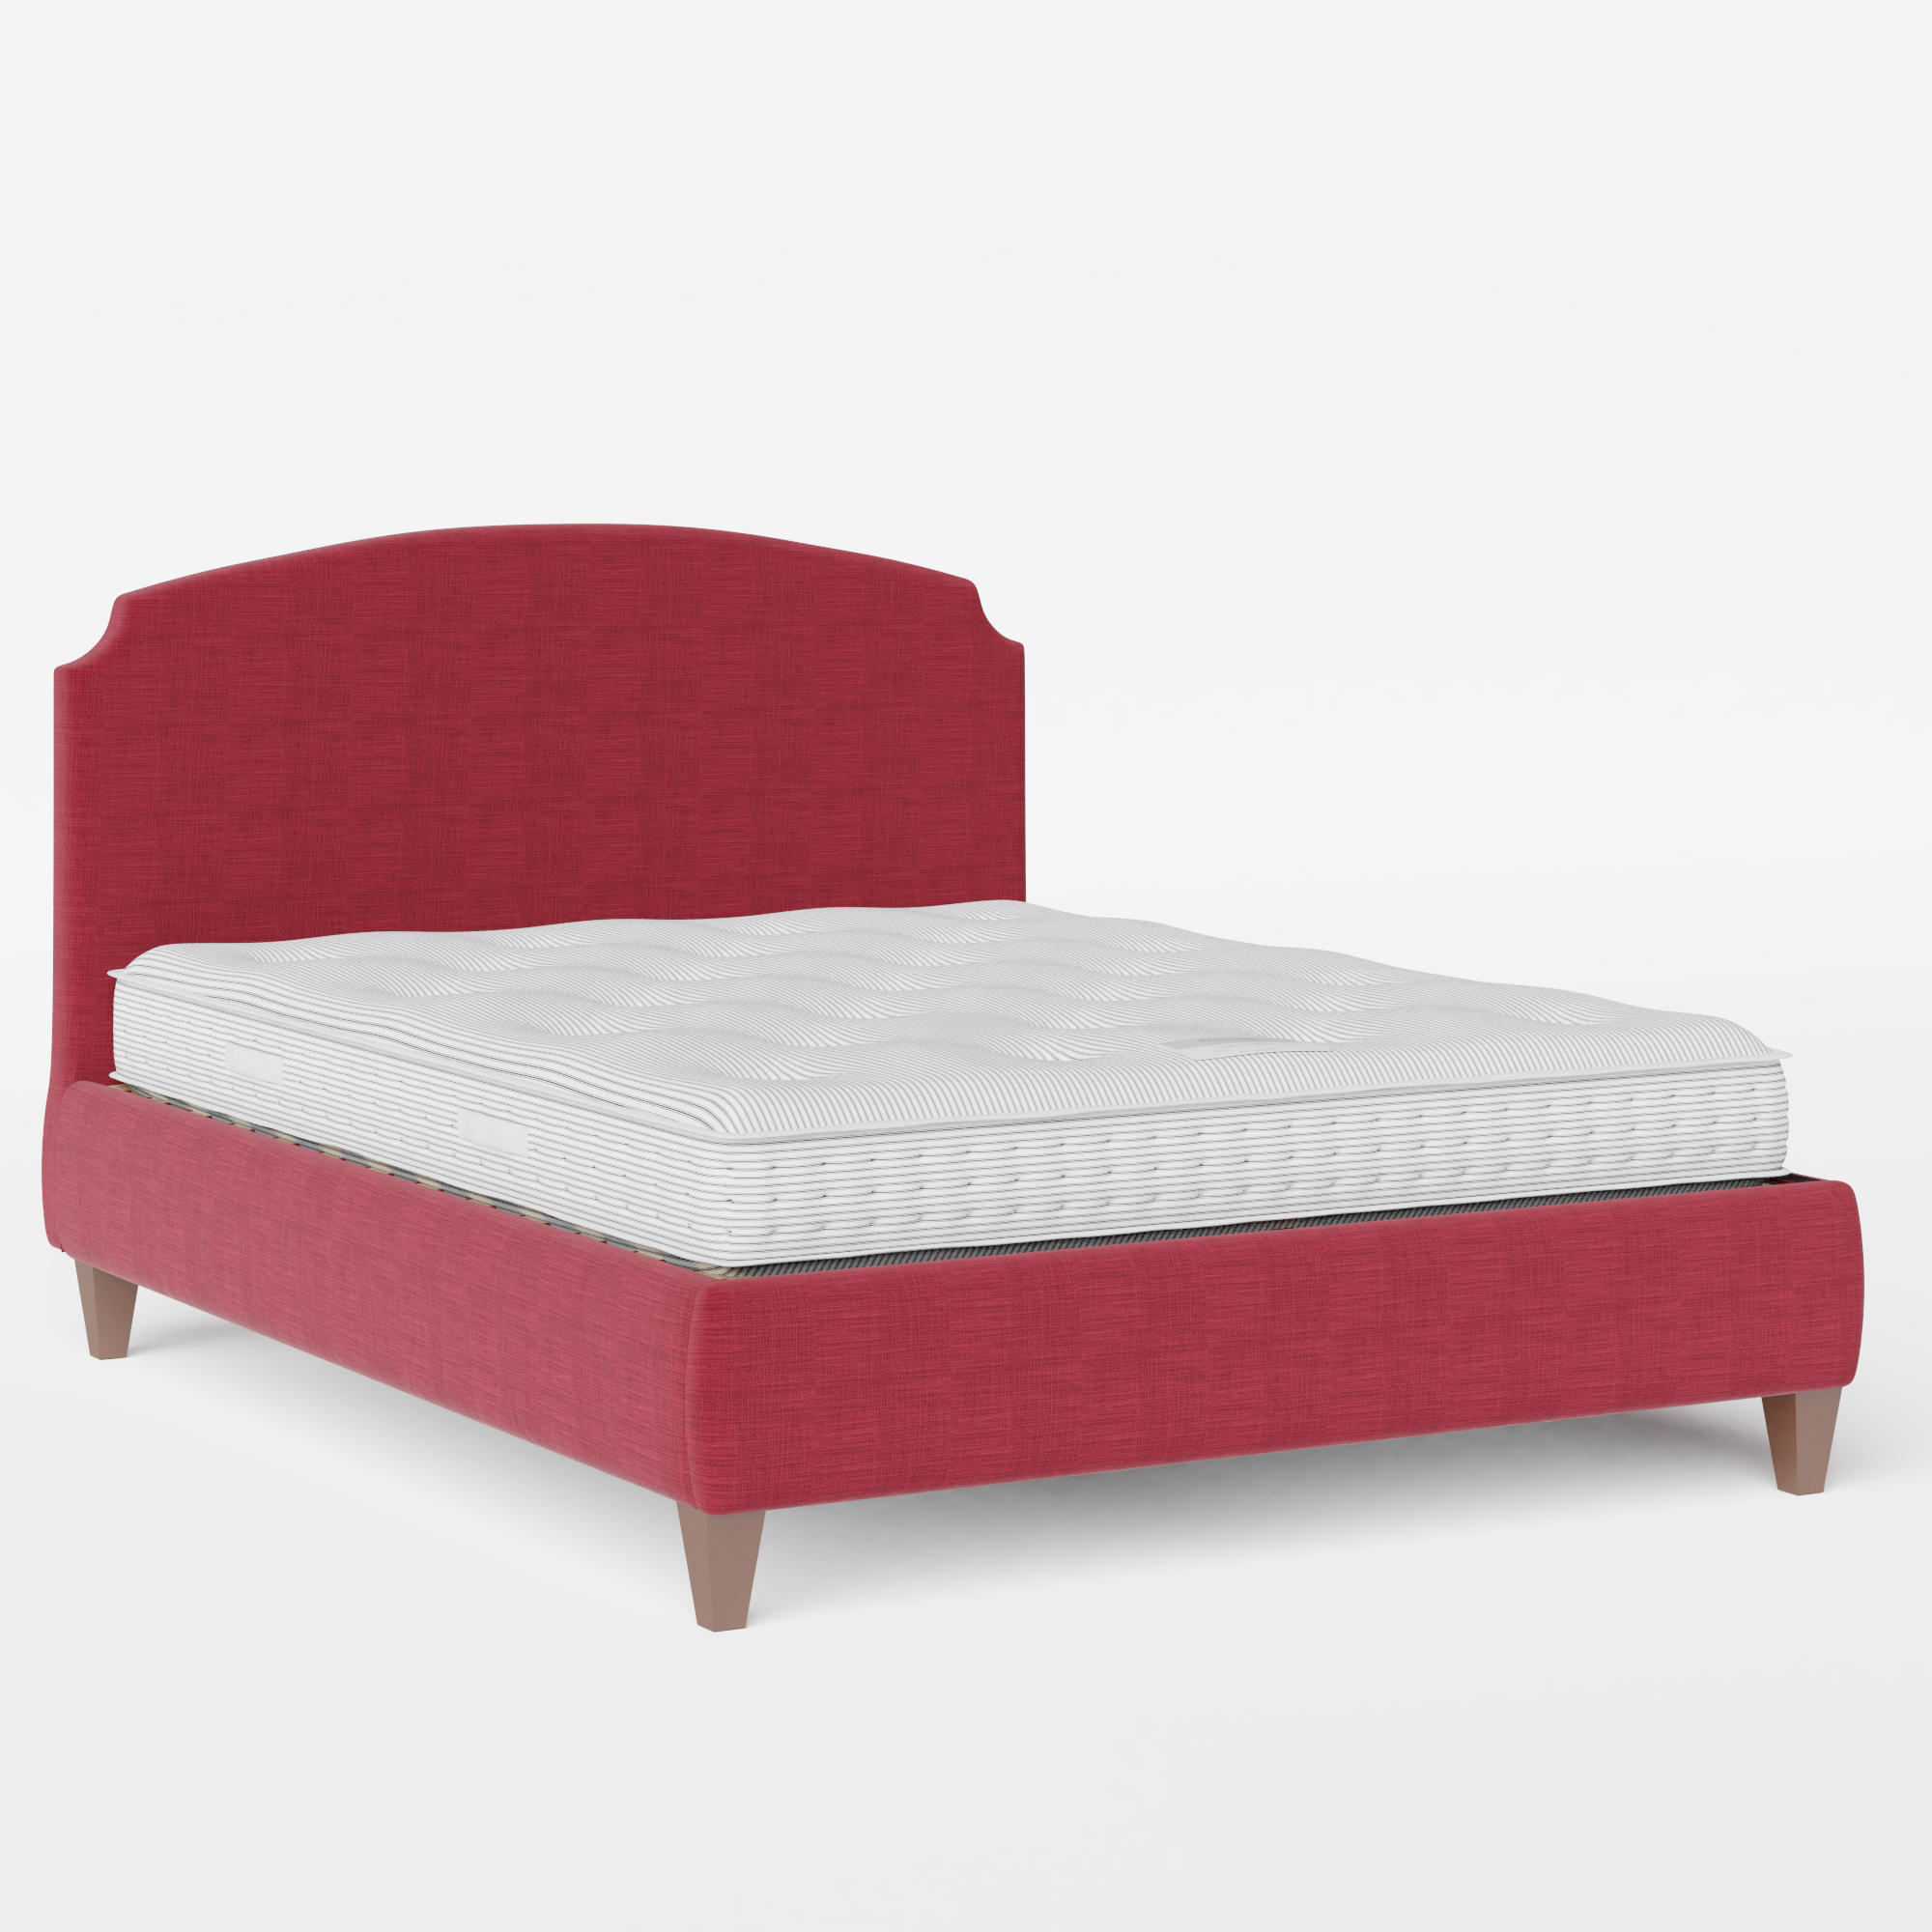 Lide stoffen bed in cherry